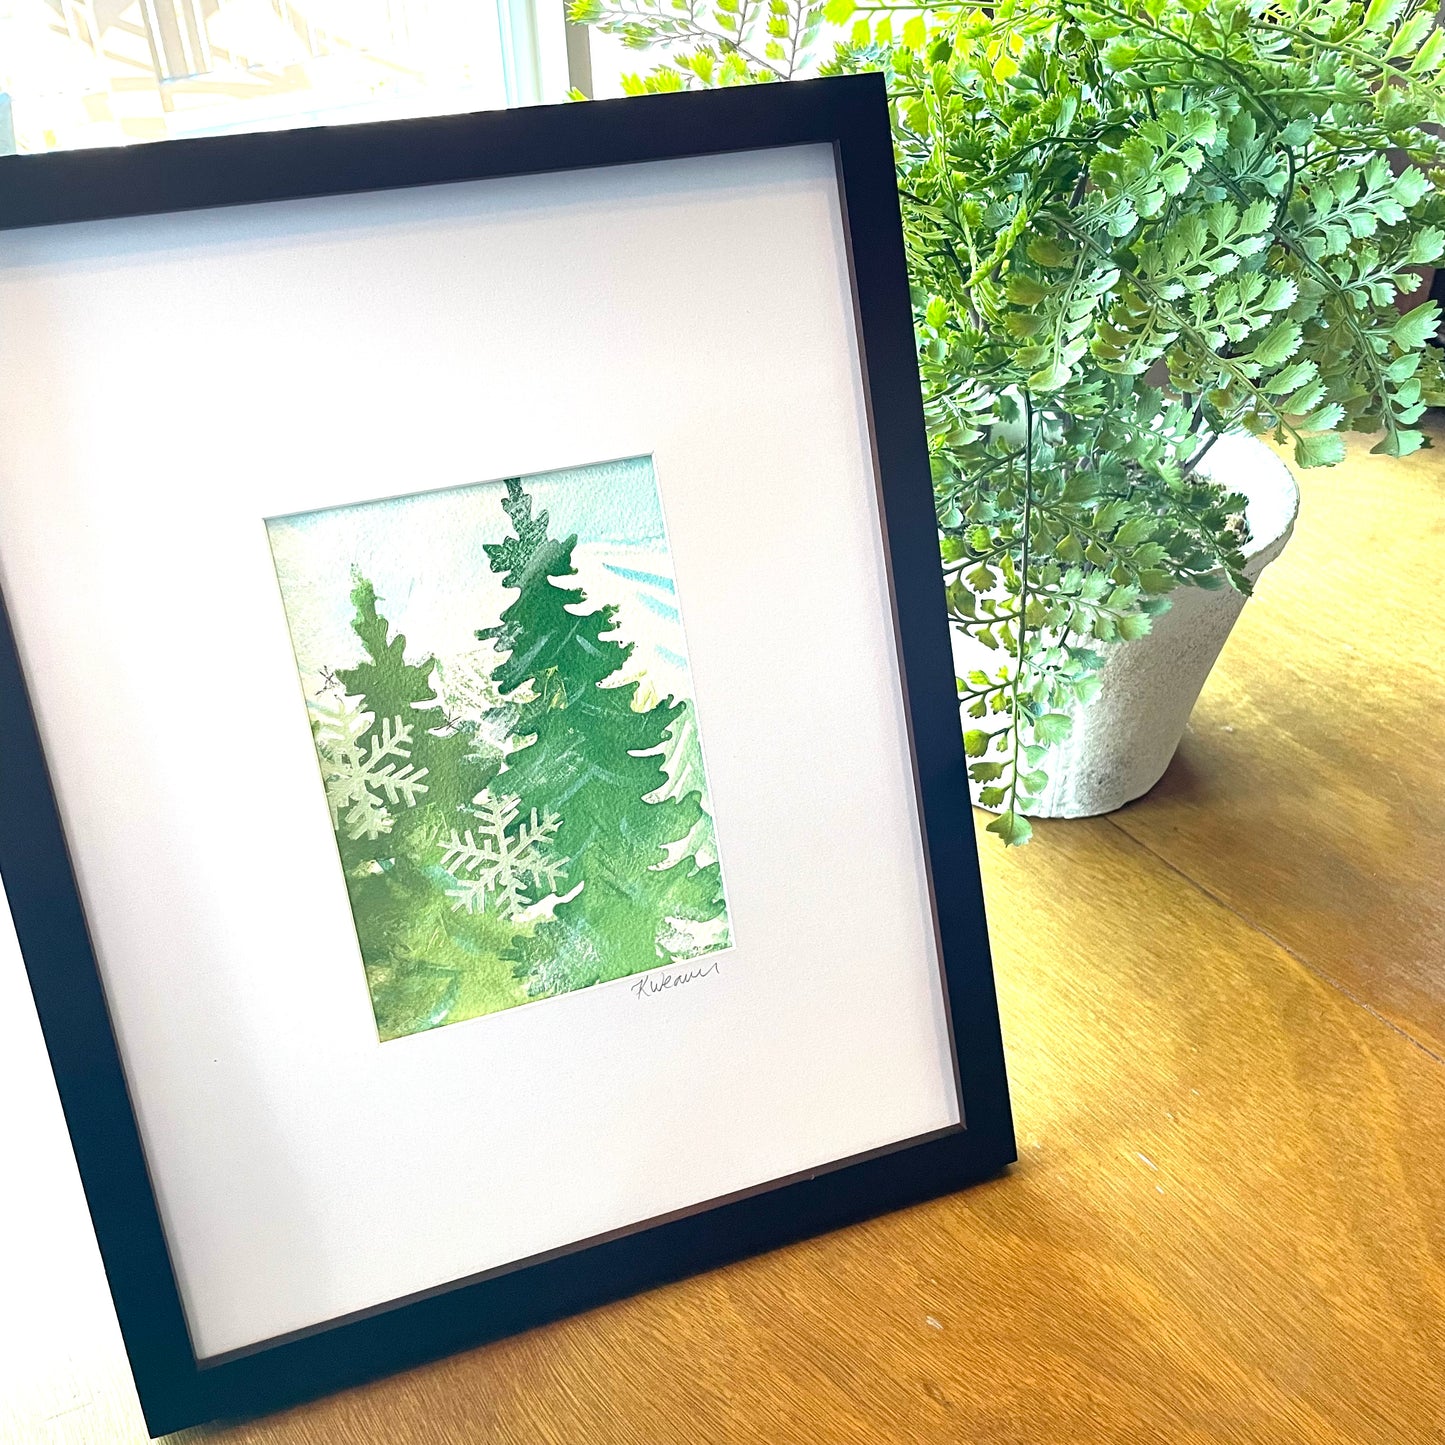 Evergreen painting with snowflakes